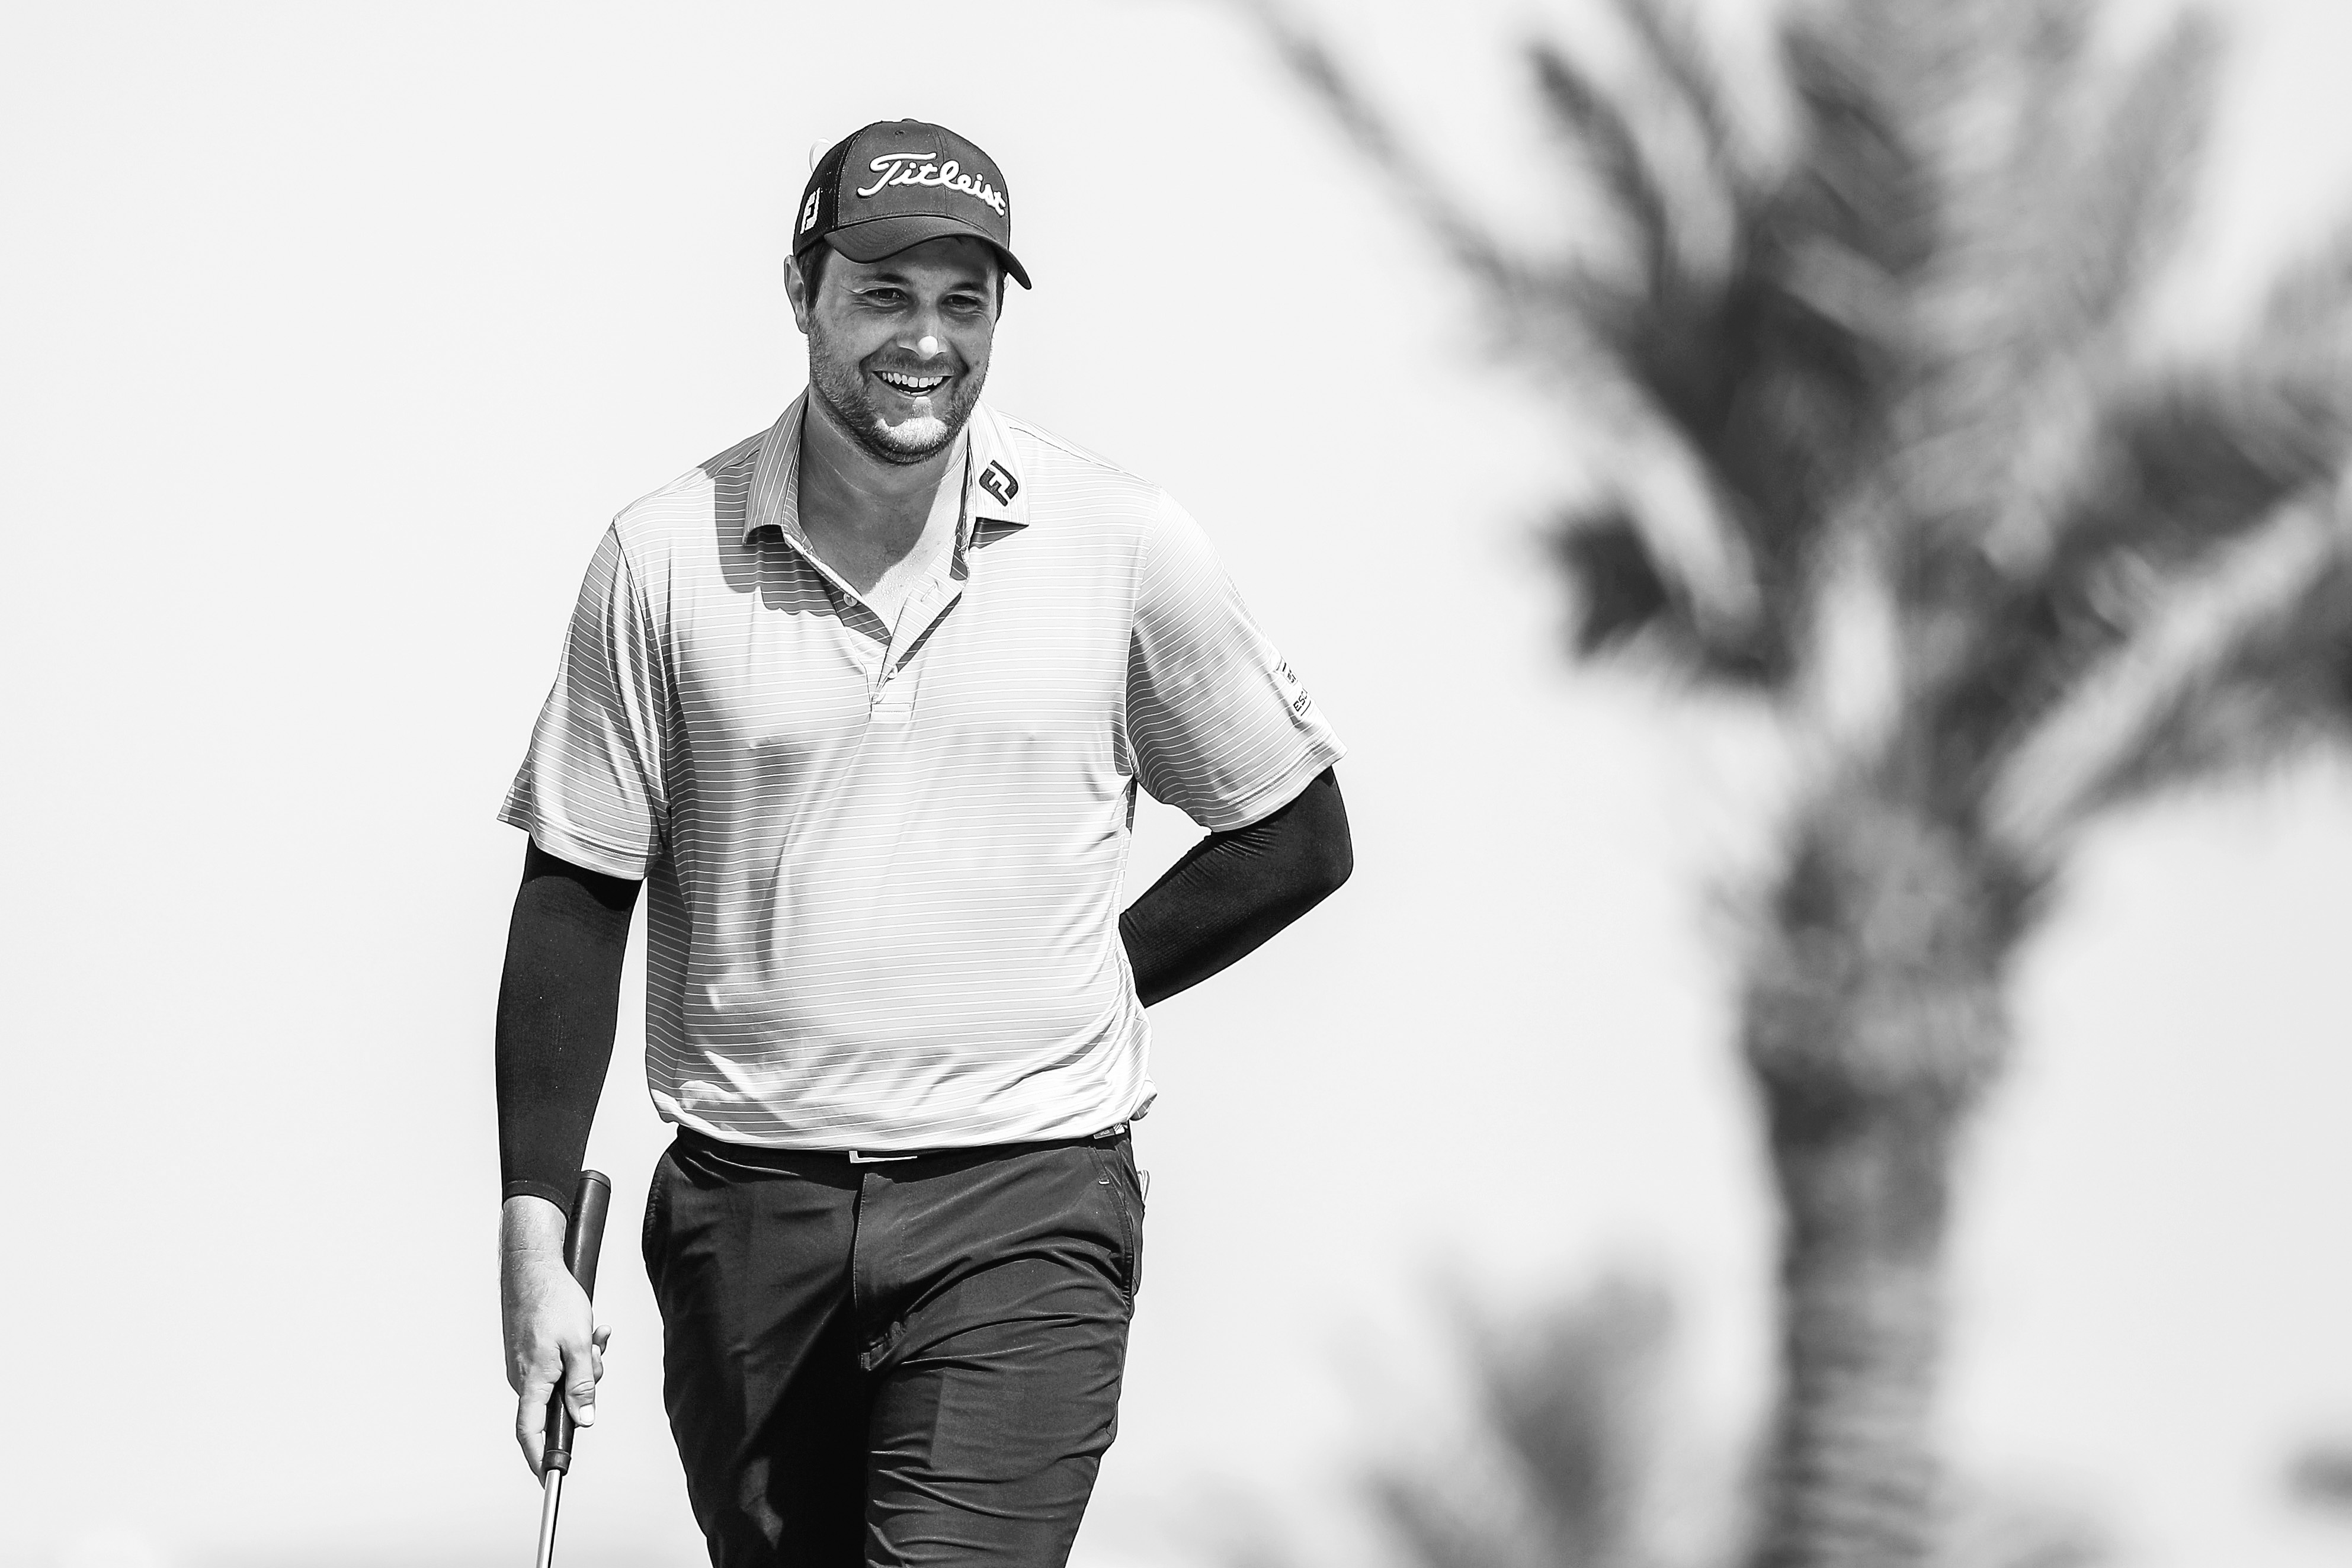 Peter Uihlein of Smash GC reacts after putting on the eighth green during day two of the LIV Golf Invitational - Jeddah at Royal Greens Golf &amp; Country Club on October 15, 2022 in King Abdullah Economic City, Saudi Arabia.